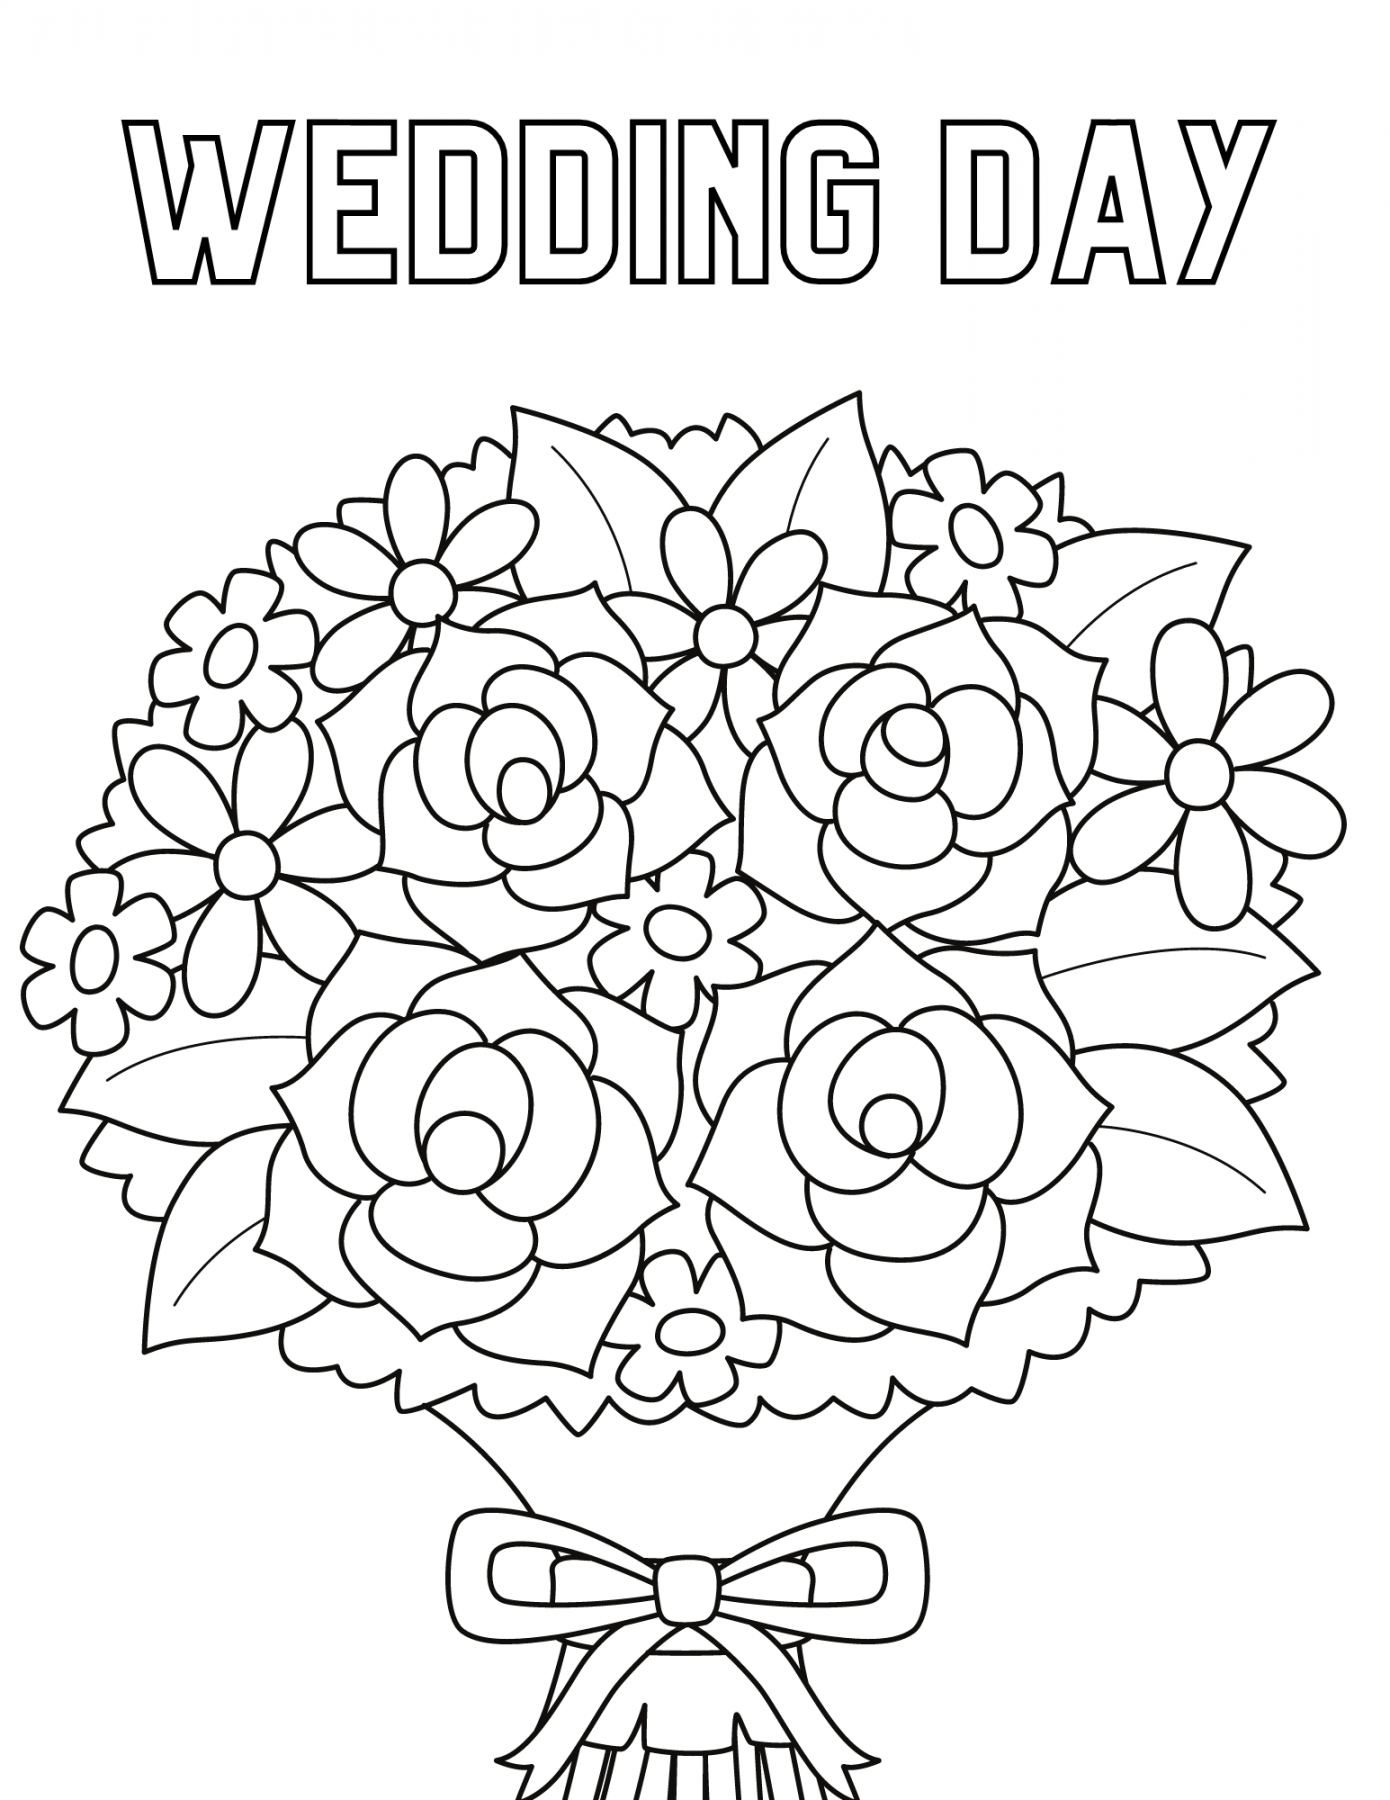 Free Printable Wedding Coloring Pages for Kids and Adults - FREE Printables - Free Printable Wedding Coloring Pages